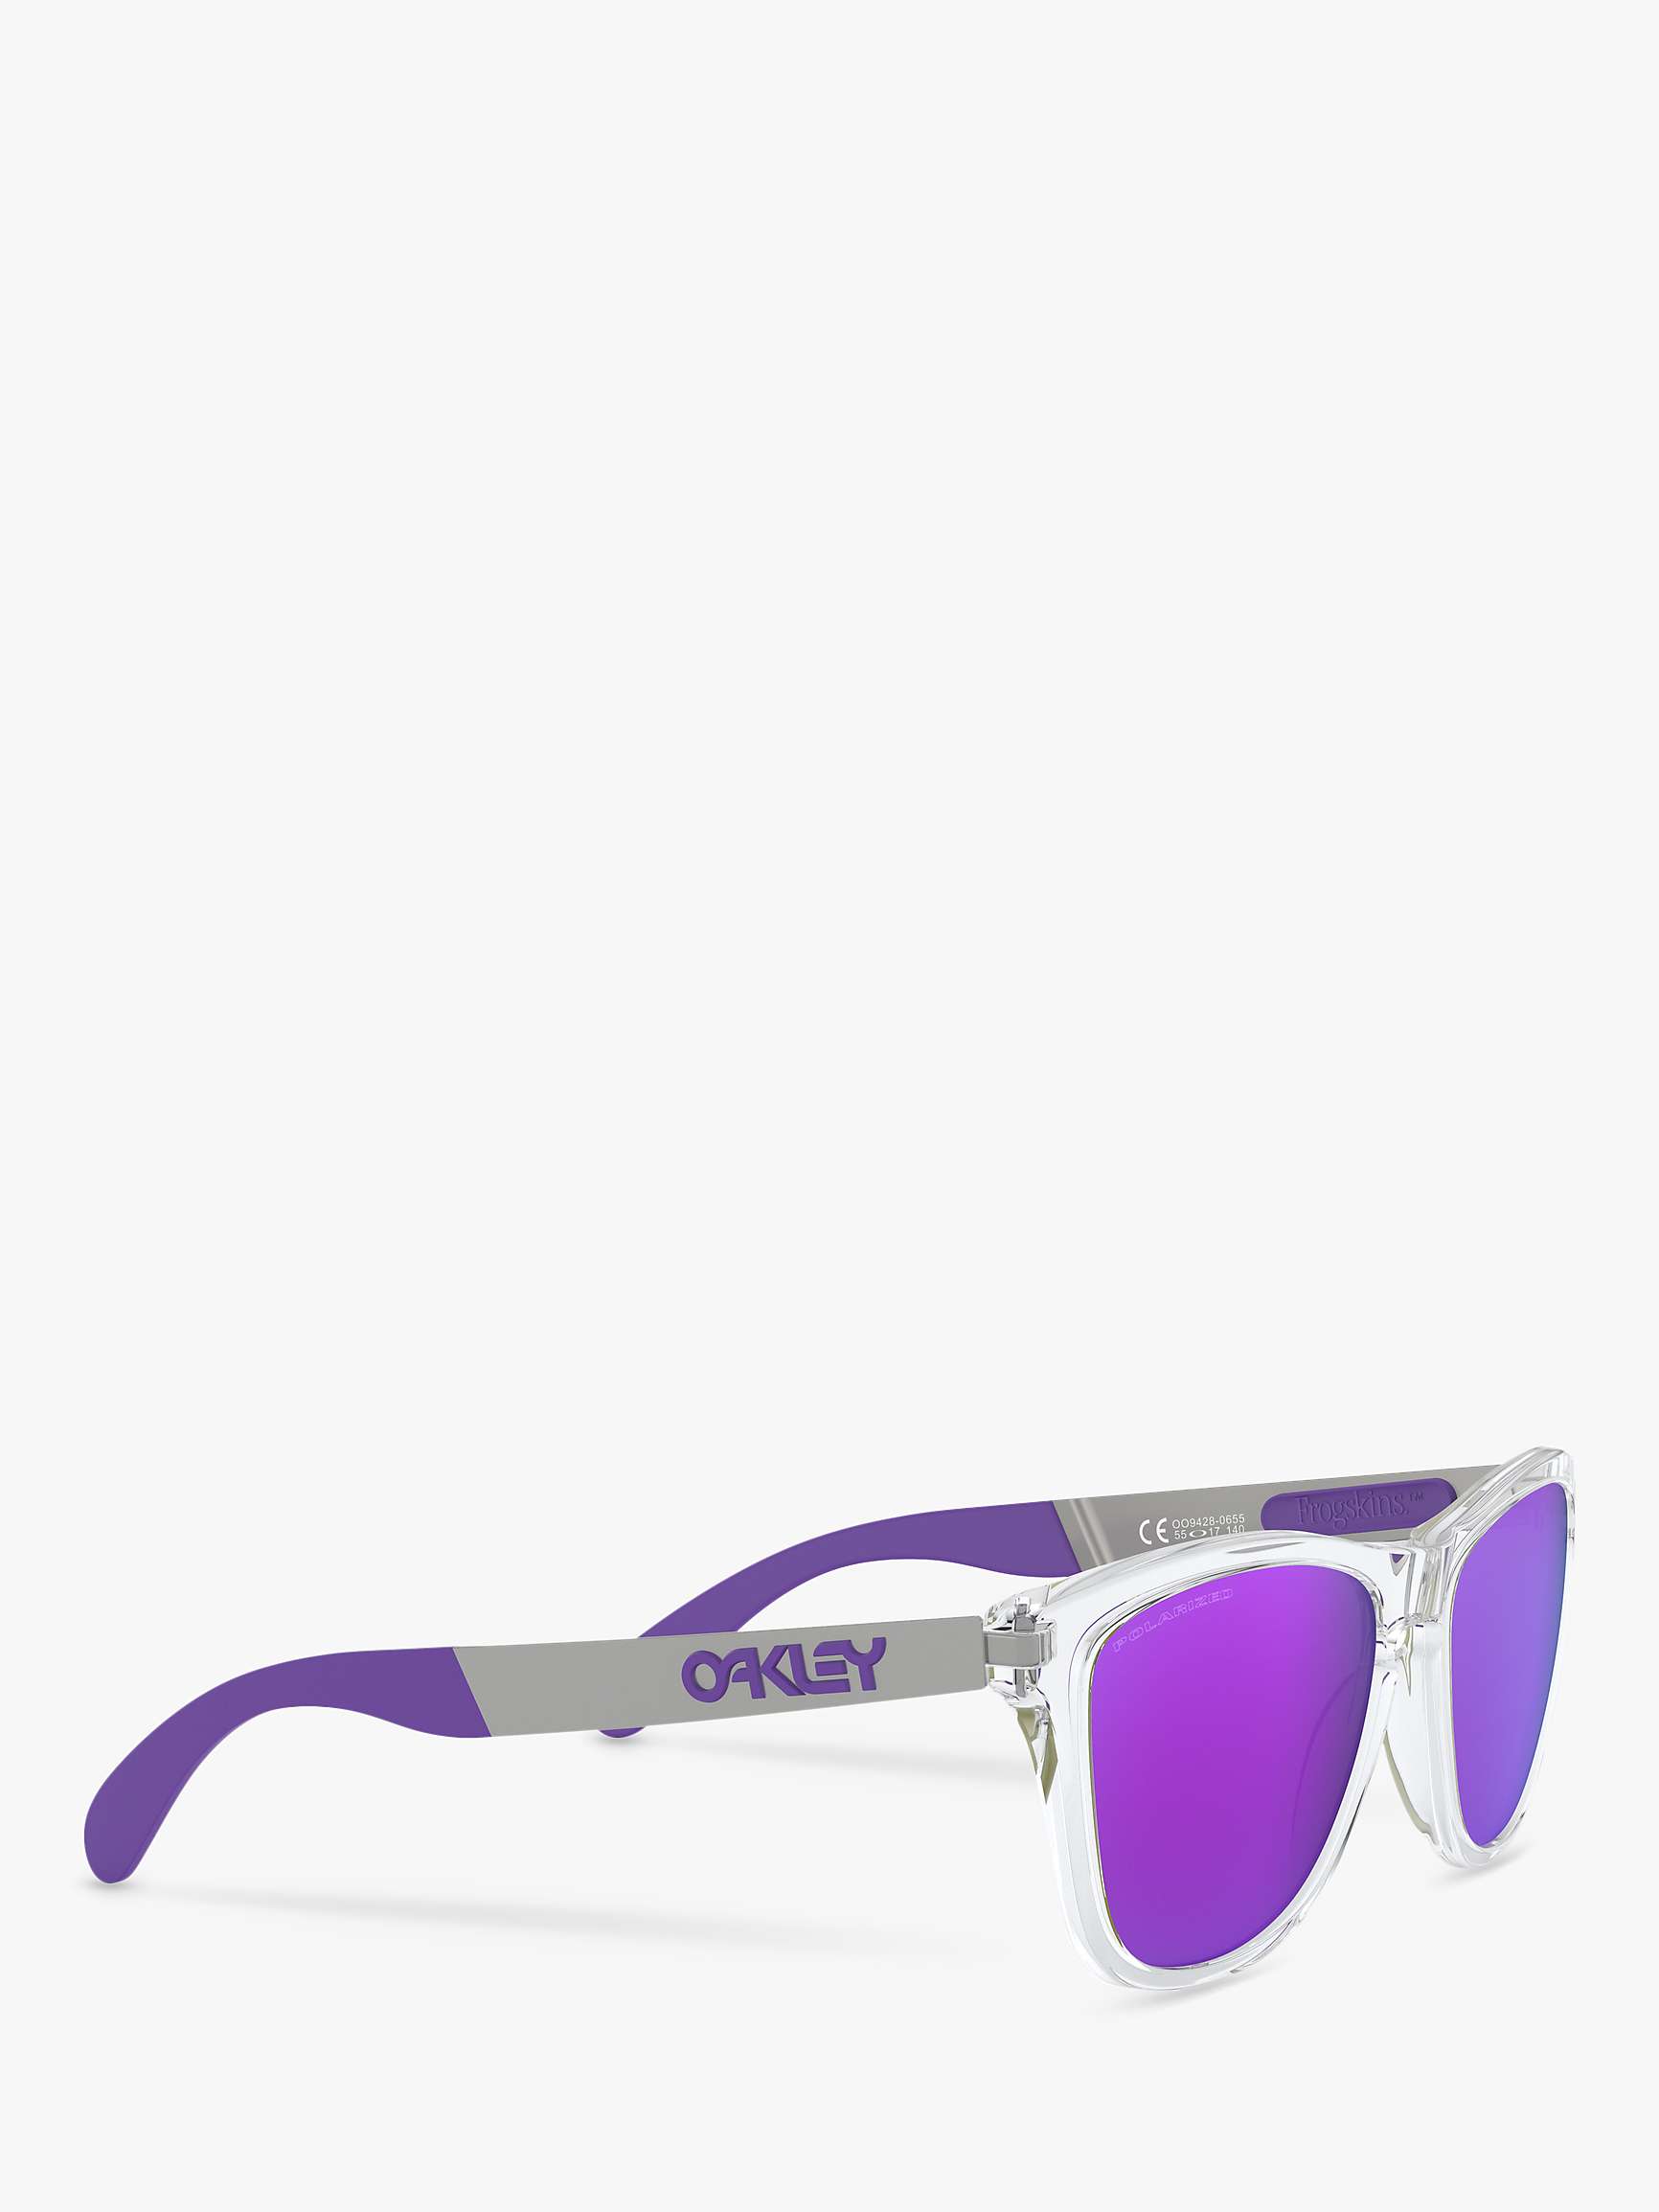 Buy Oakley OO9428 Men's Frogskins Polarised Square Sunglasses, Clear Mix/Purple Online at johnlewis.com